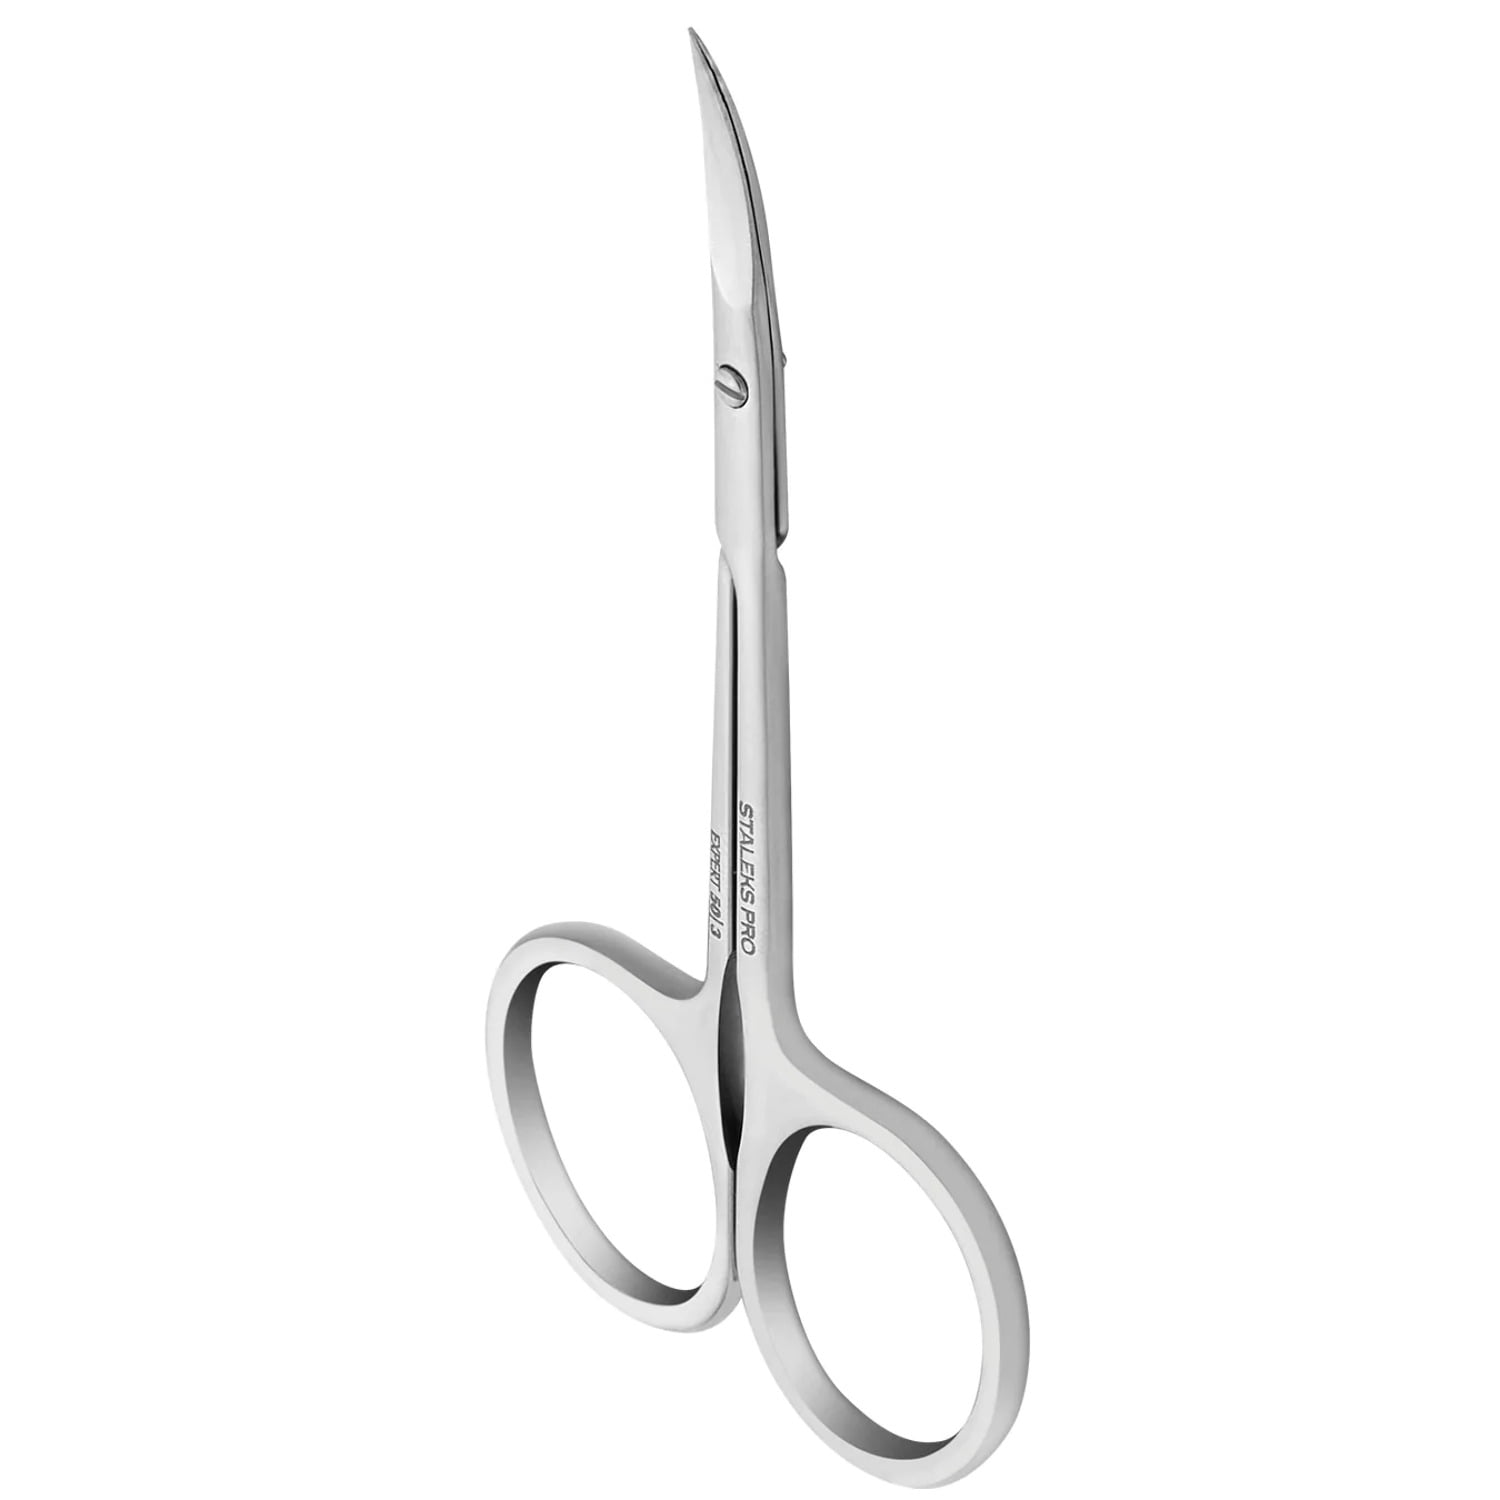 Round Headed Nose Hair Scissors/Safety Scissors for Kids & Infants  Stainless Steel Baby Scissors/Baby Nail Scissors.Facial Hair Scissors/Beard